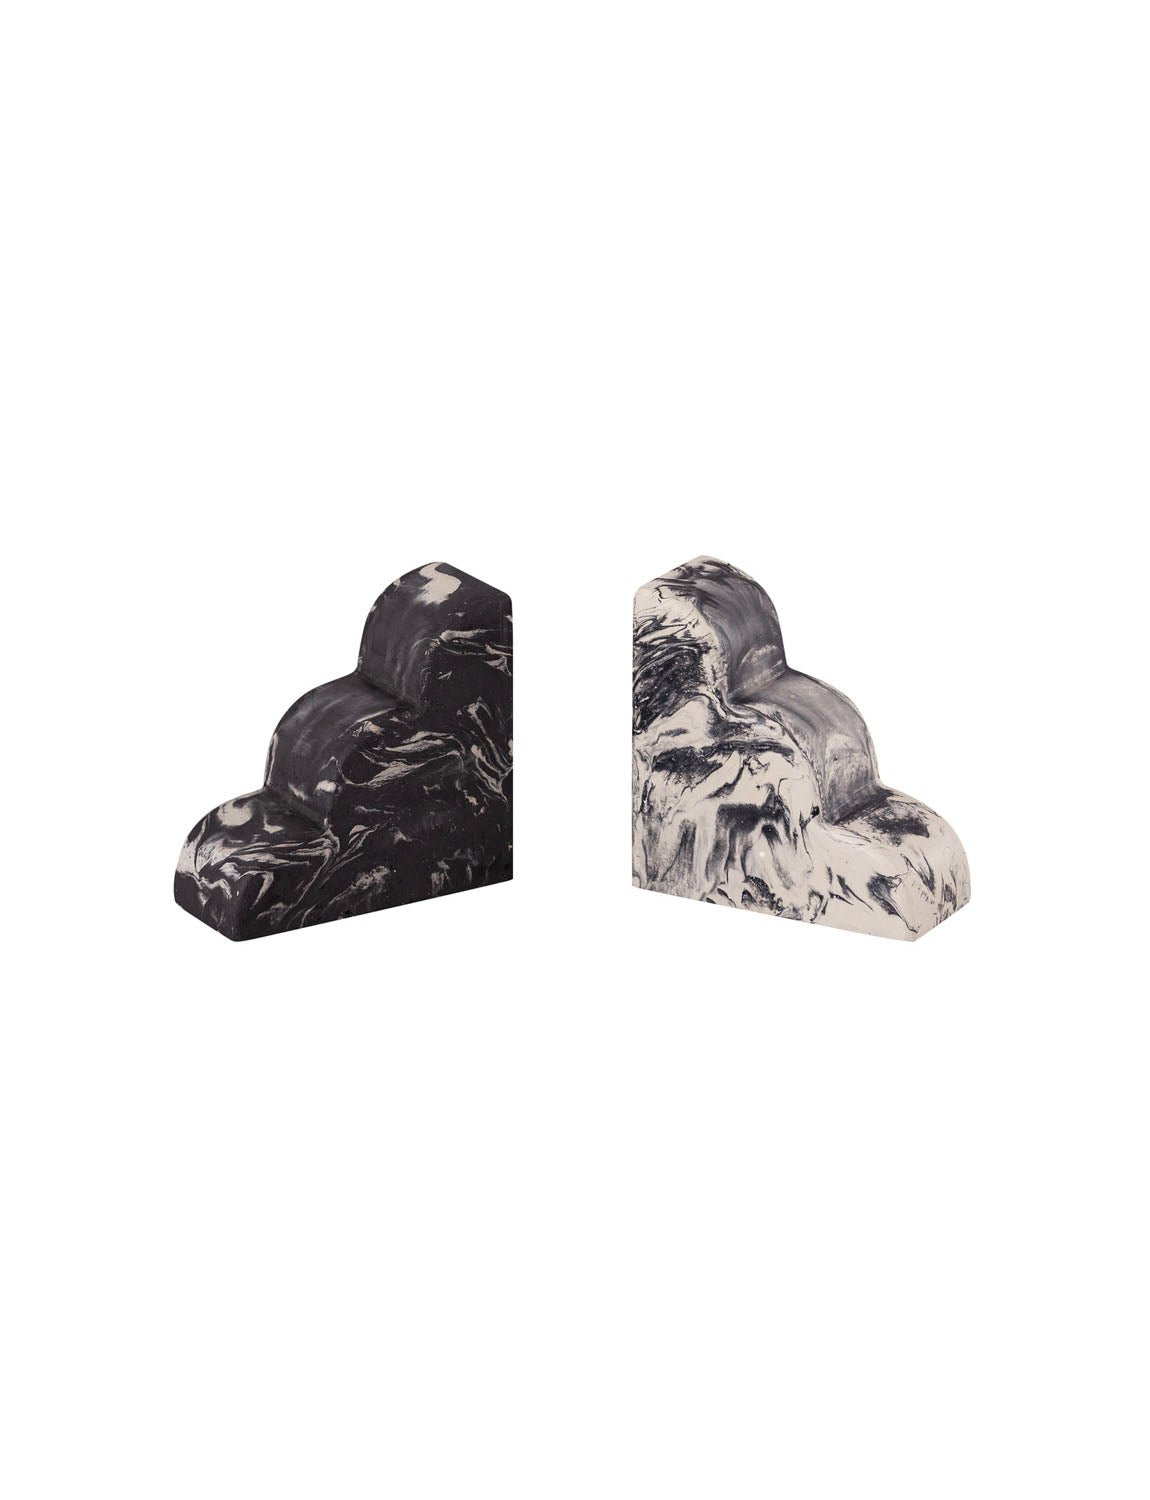 Cloud Marble Bookends